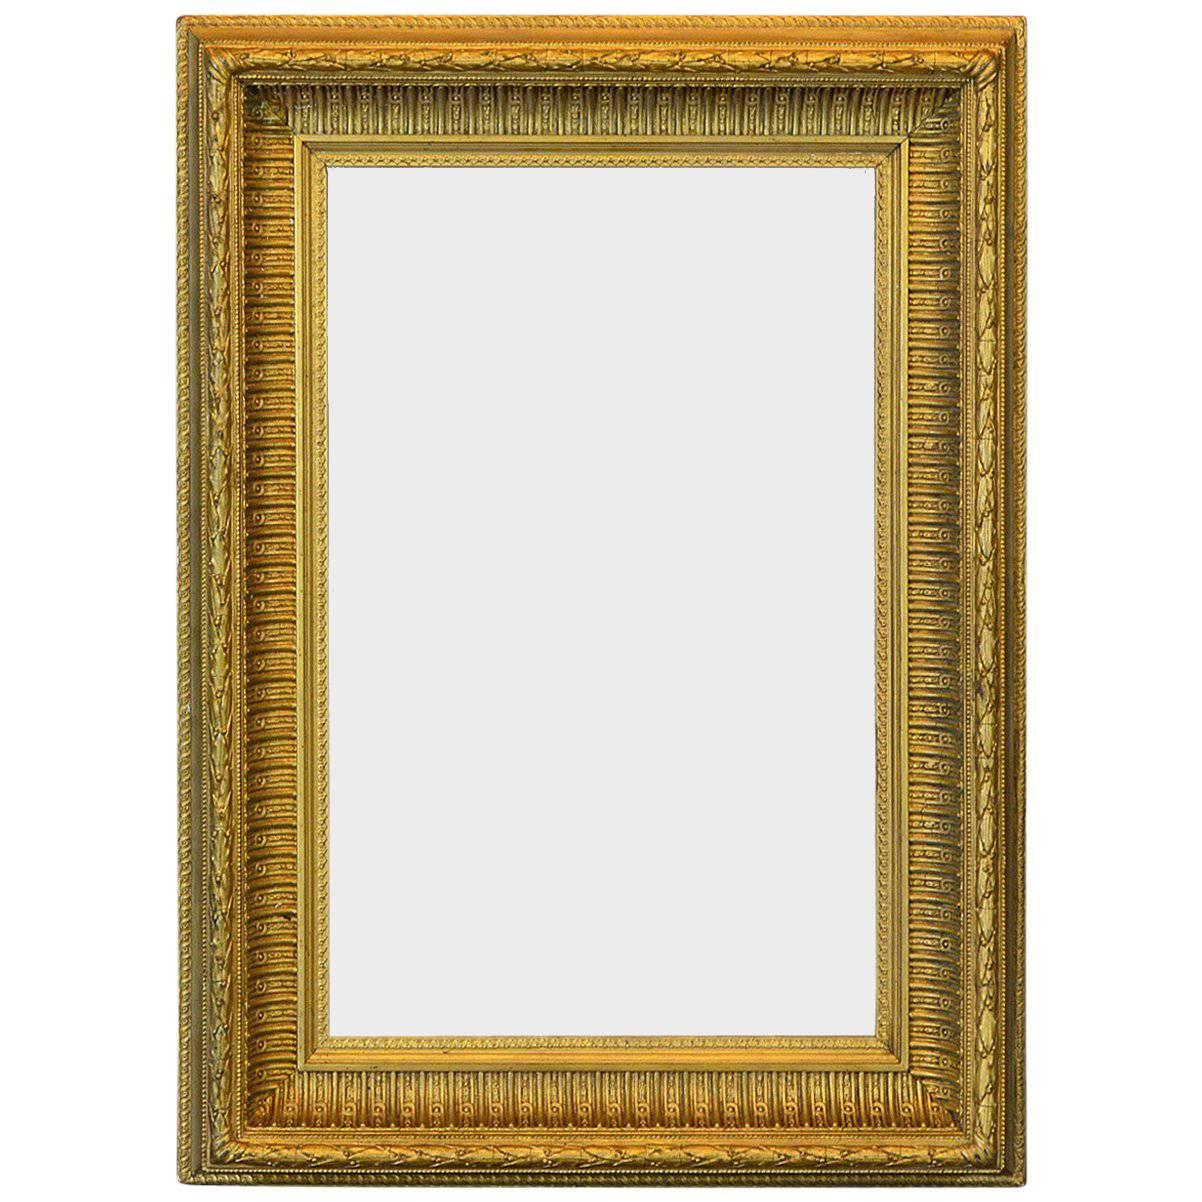 Victorian Wood and Gilt Antique Picture Frame, circa 1880